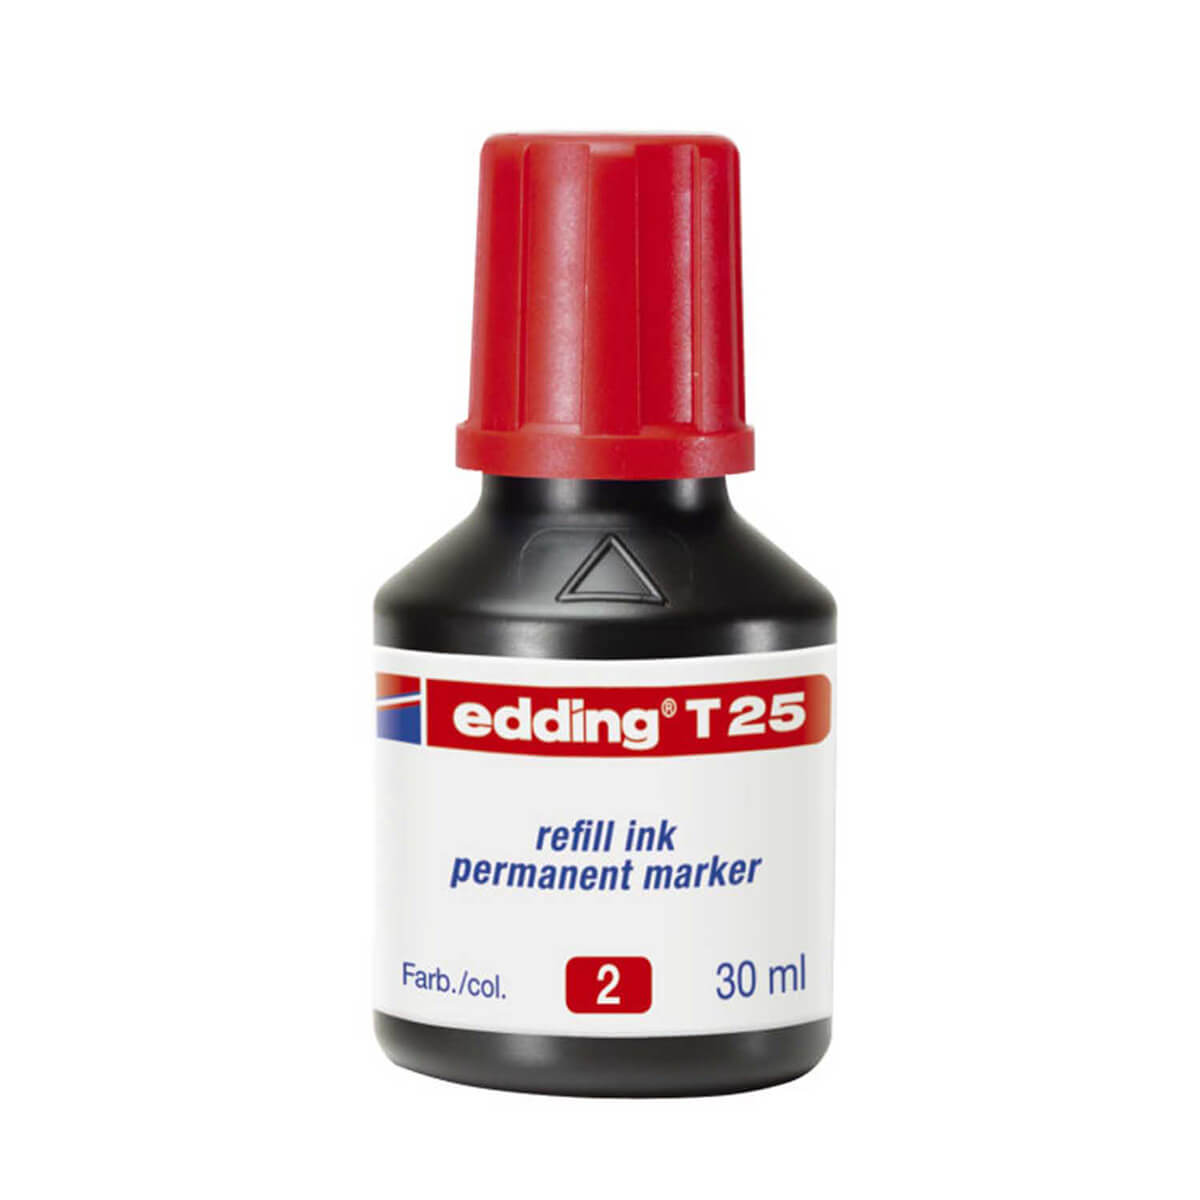 Edding T25 refill ink for permanent markers, red, 30ml